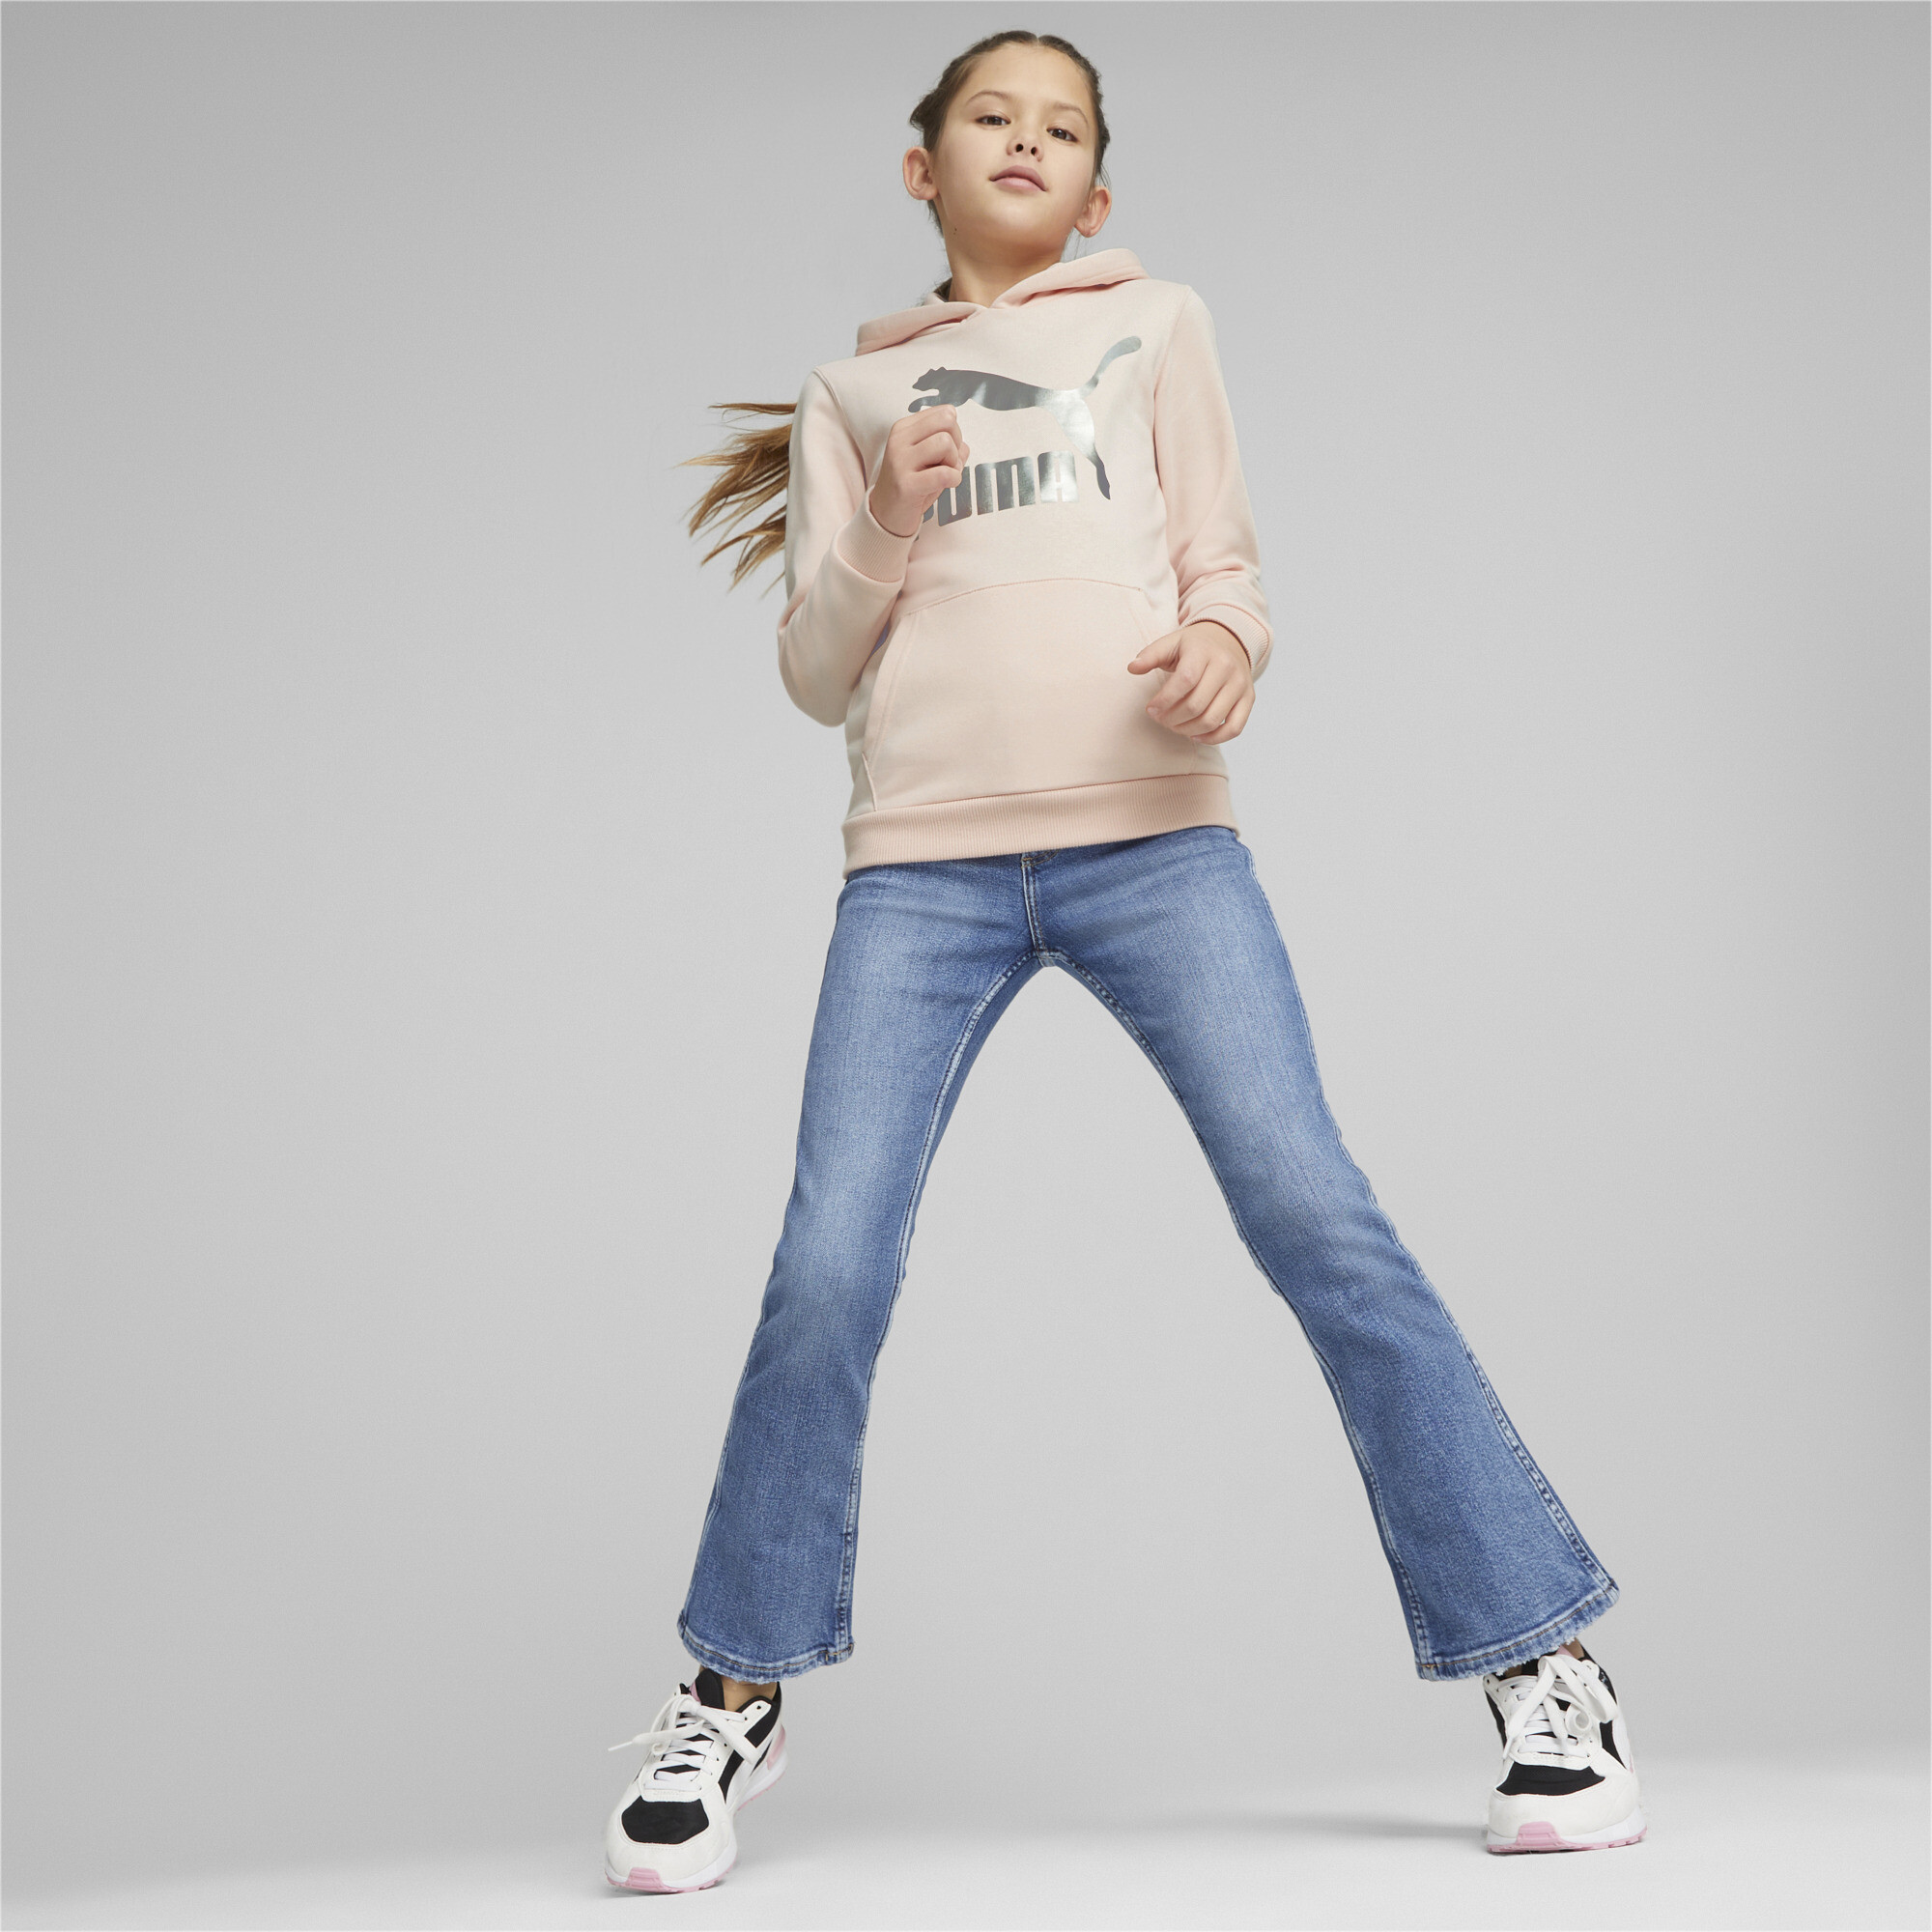 PUMA Classics Logo Hoodie In 70 - Pink, Size 3-4 Youth